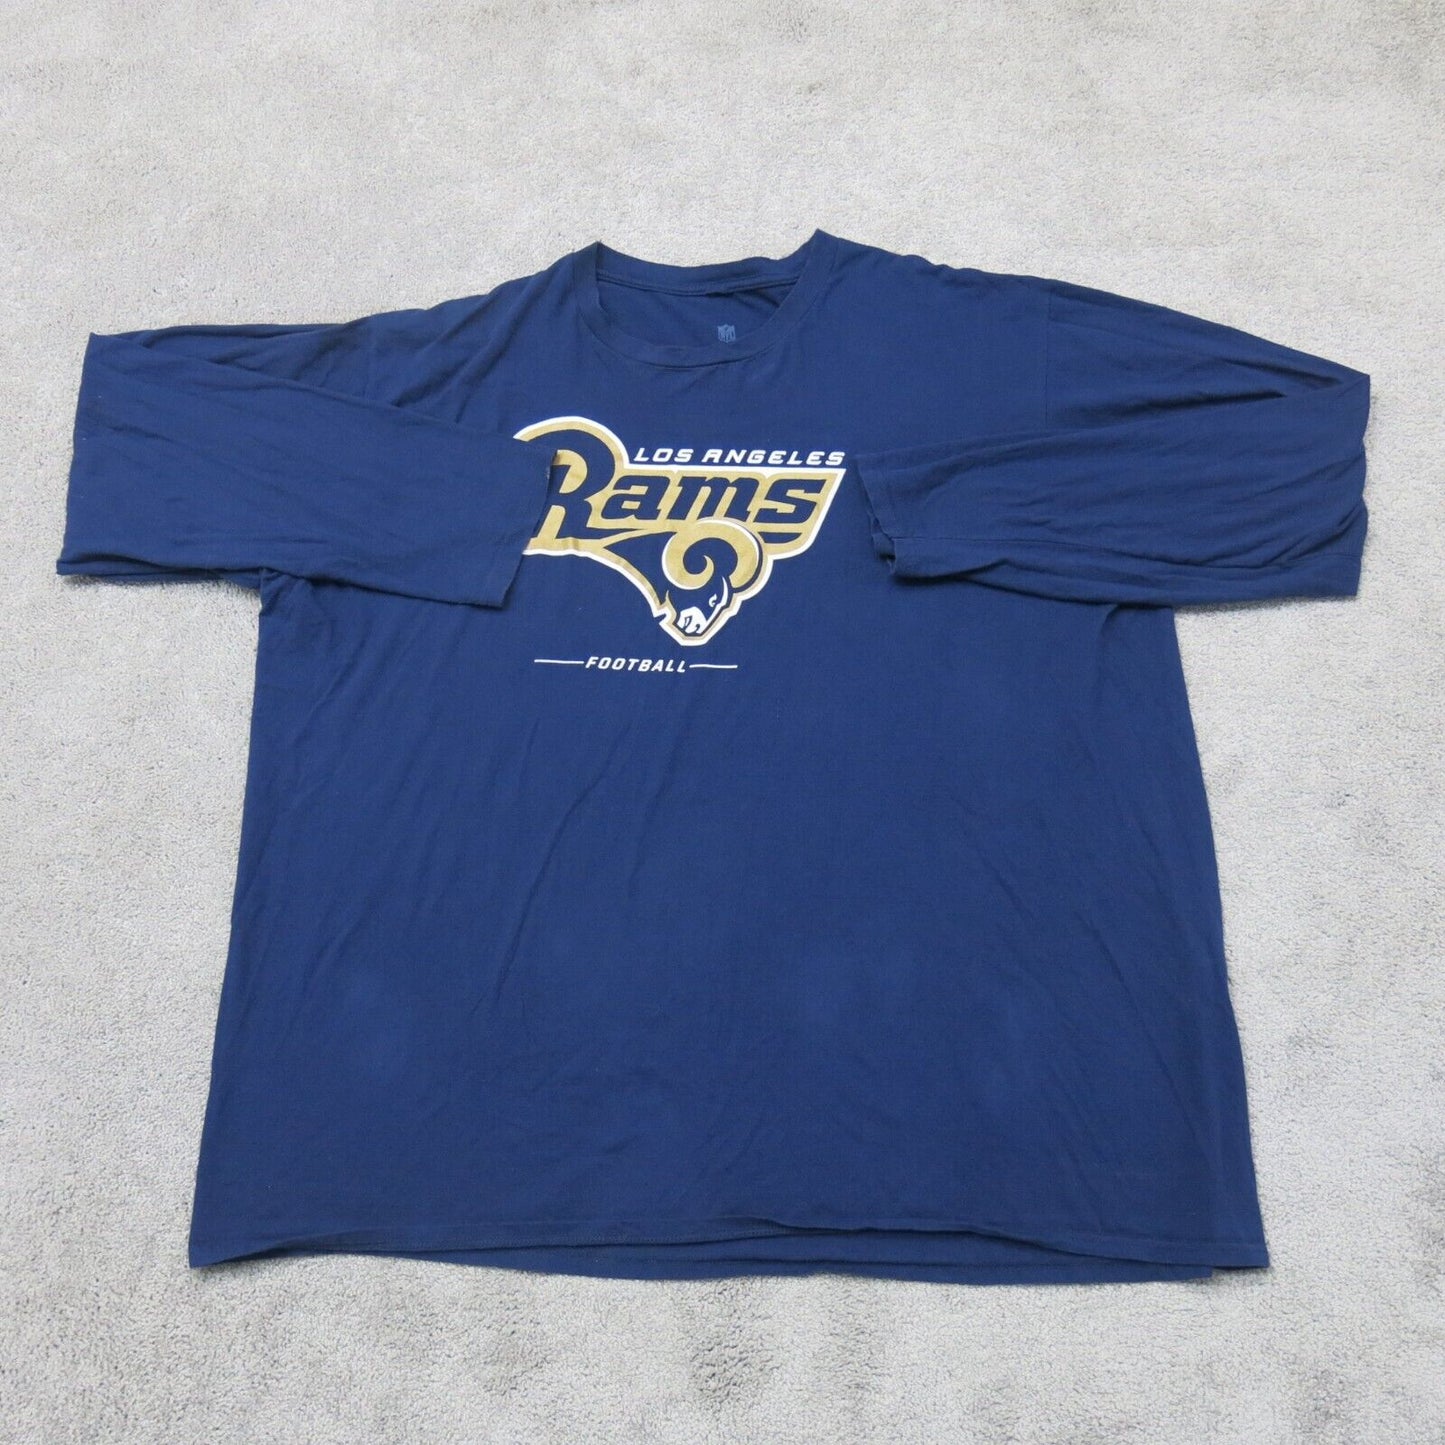 Nike Women's Fashion (NFL Los Angeles Rams) 3/4-Sleeve T-Shirt in Blue, Size: Large | NKNW054N95-06O